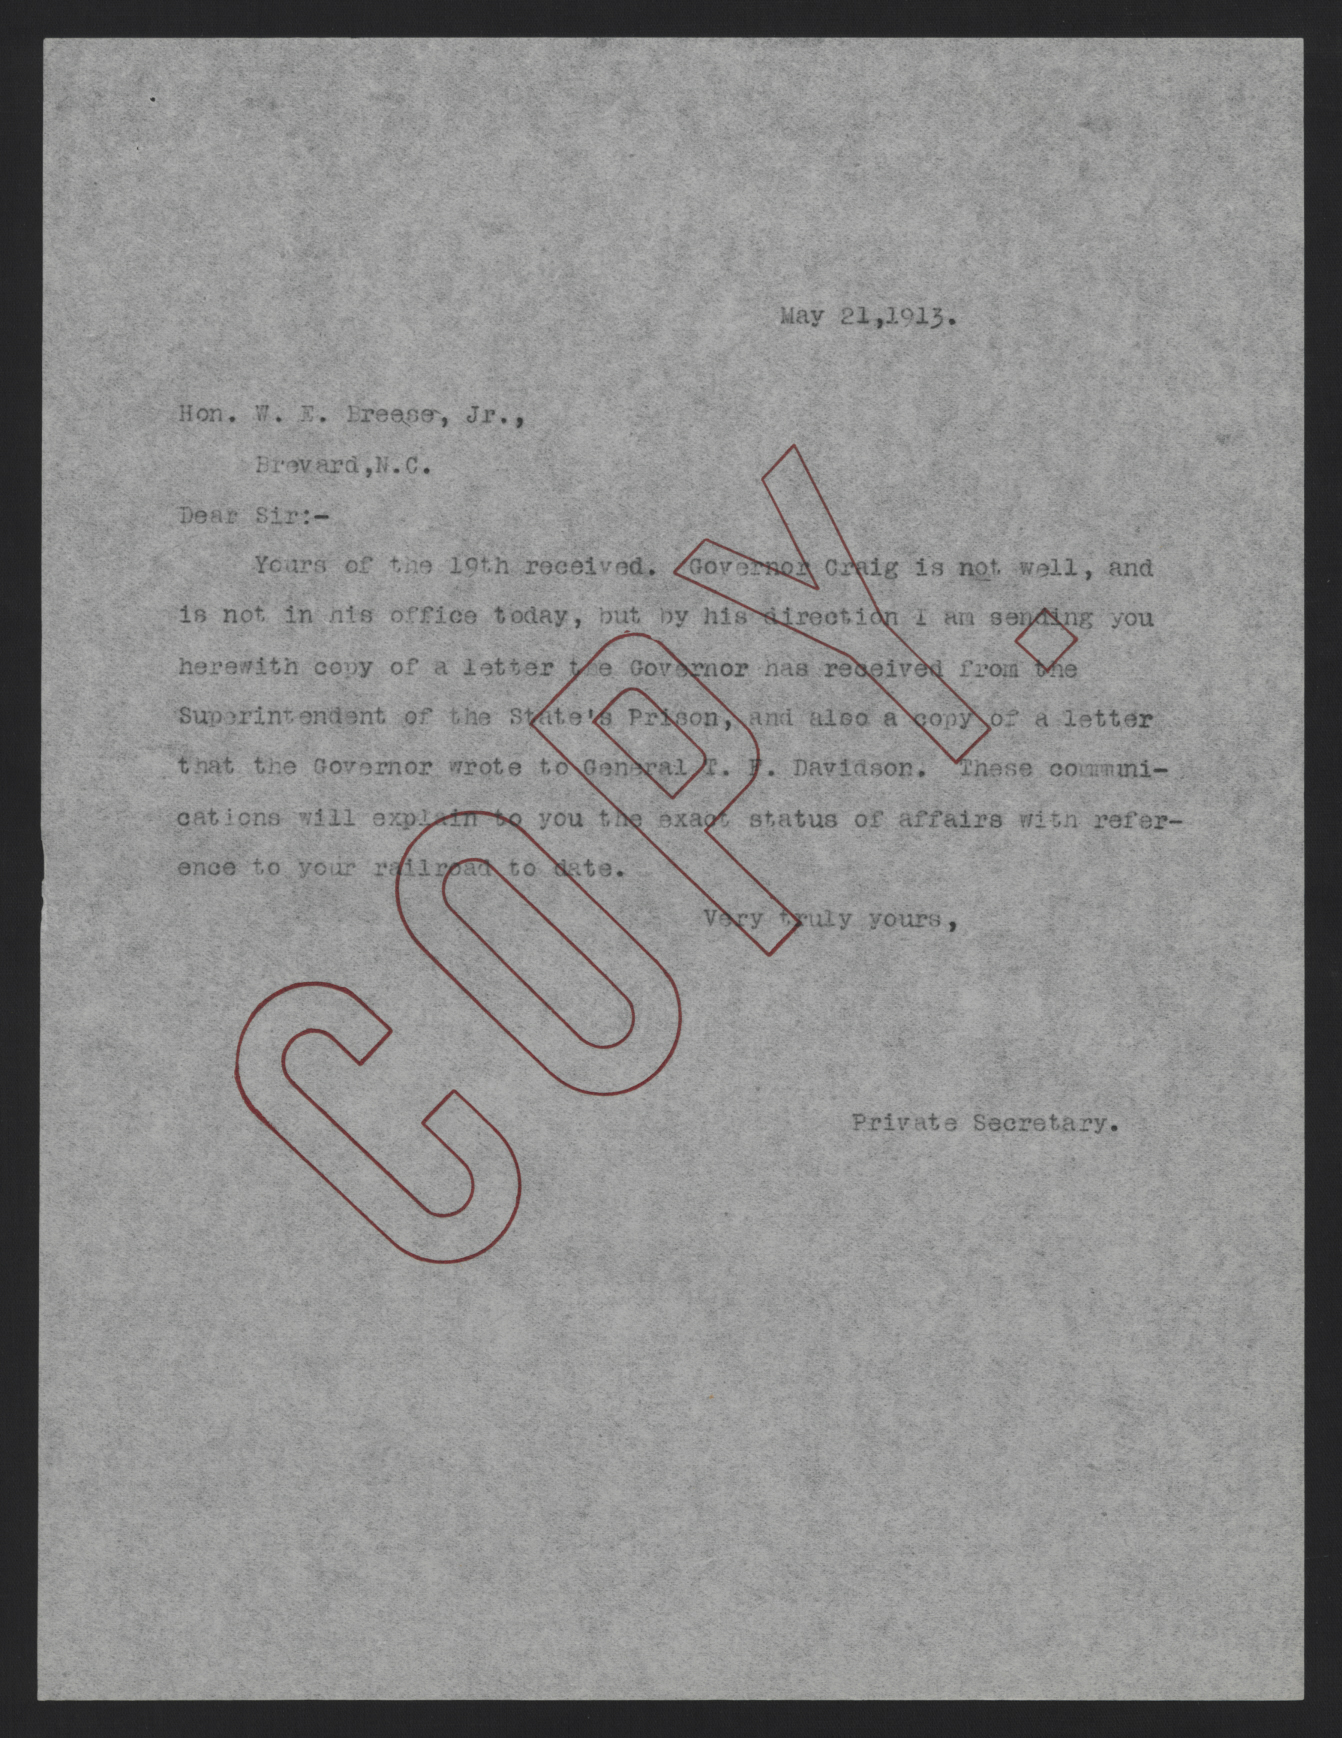 Letter from Kerr to Breese, May 21, 1913